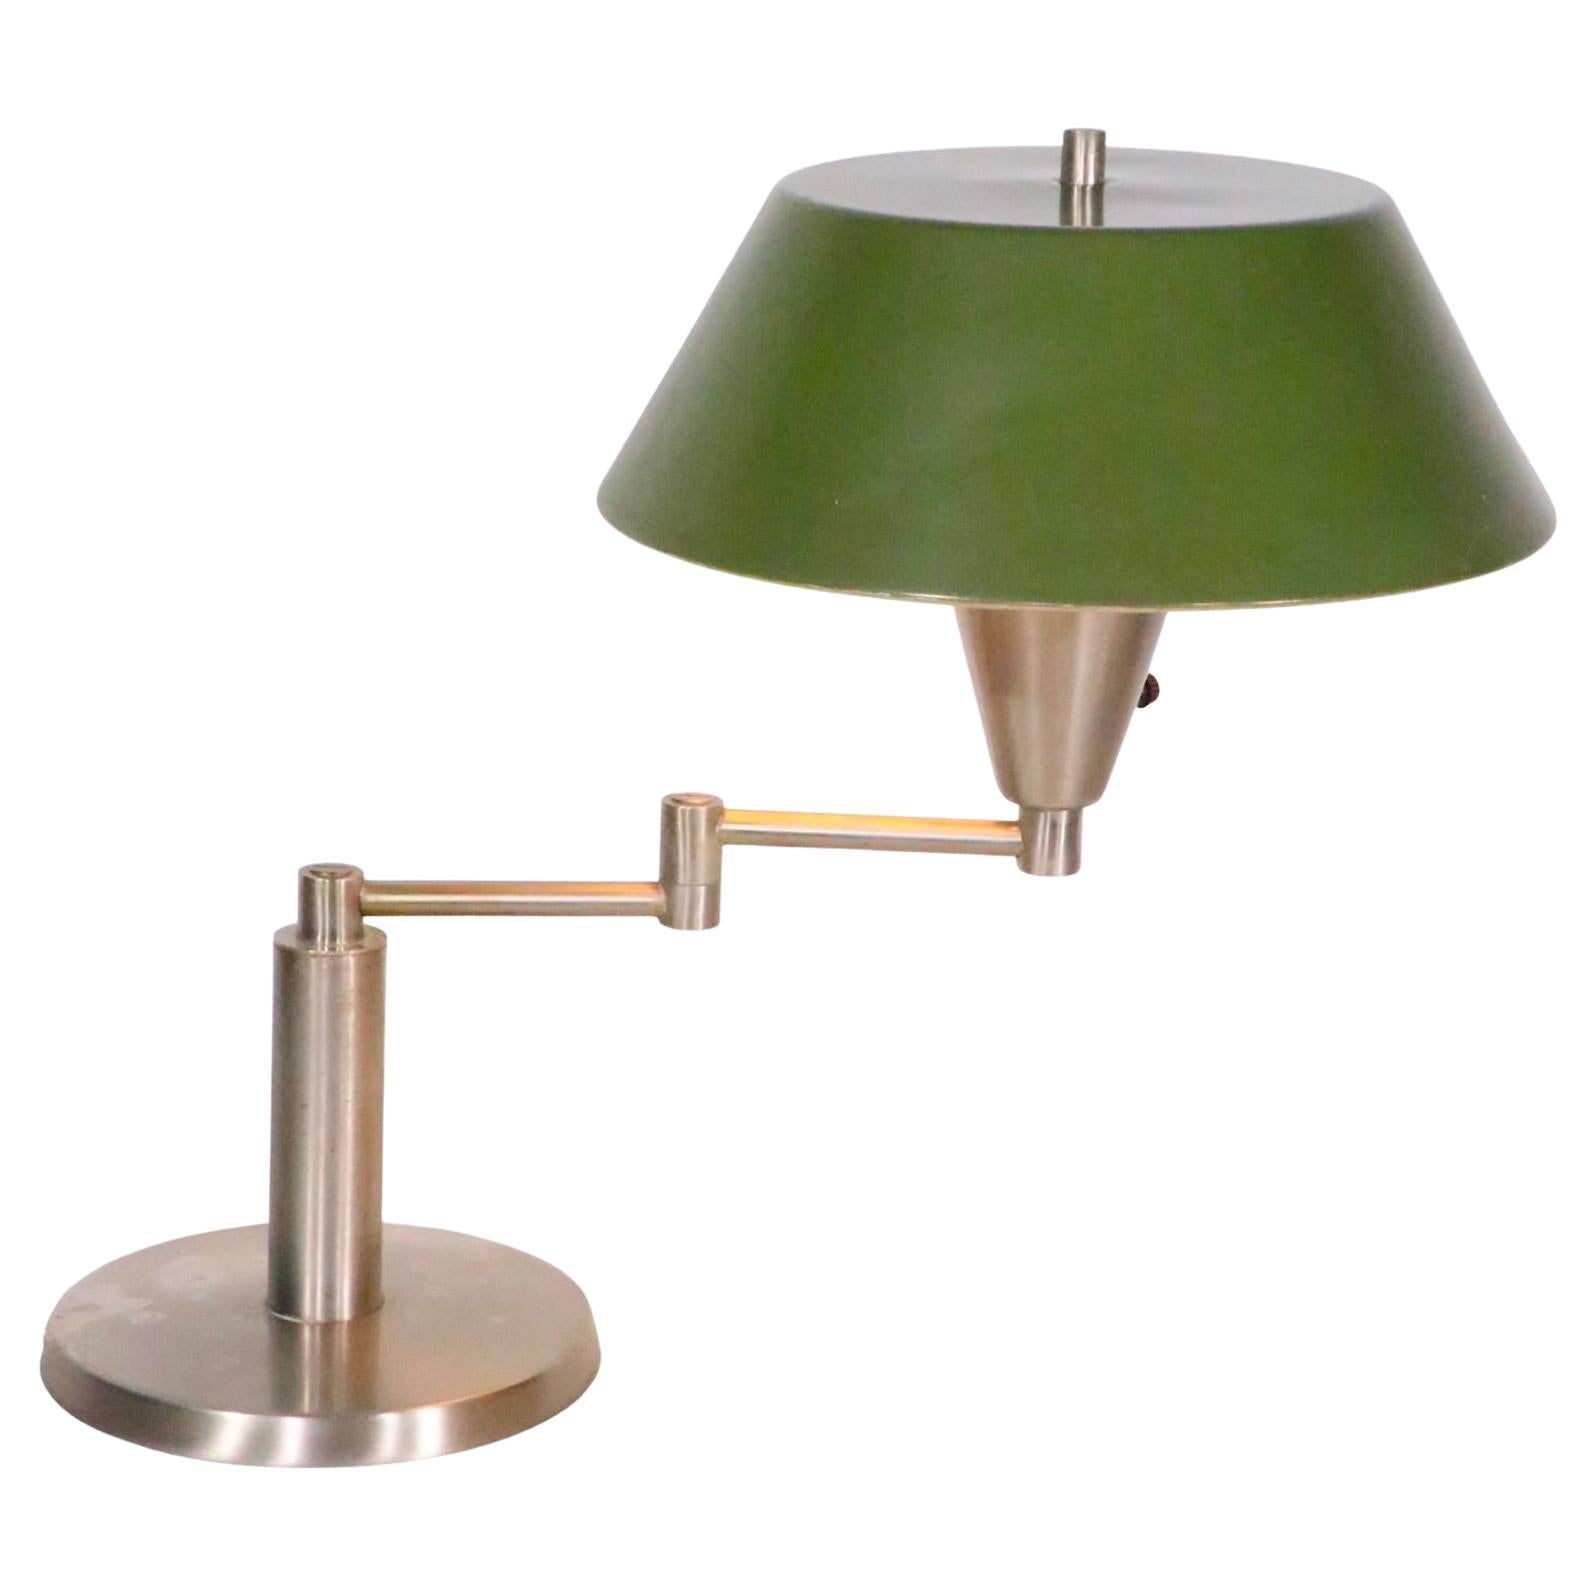 Iconic Walter Von Nessen Swing Arm Desk Lamp with Original Metal Shade For Sale